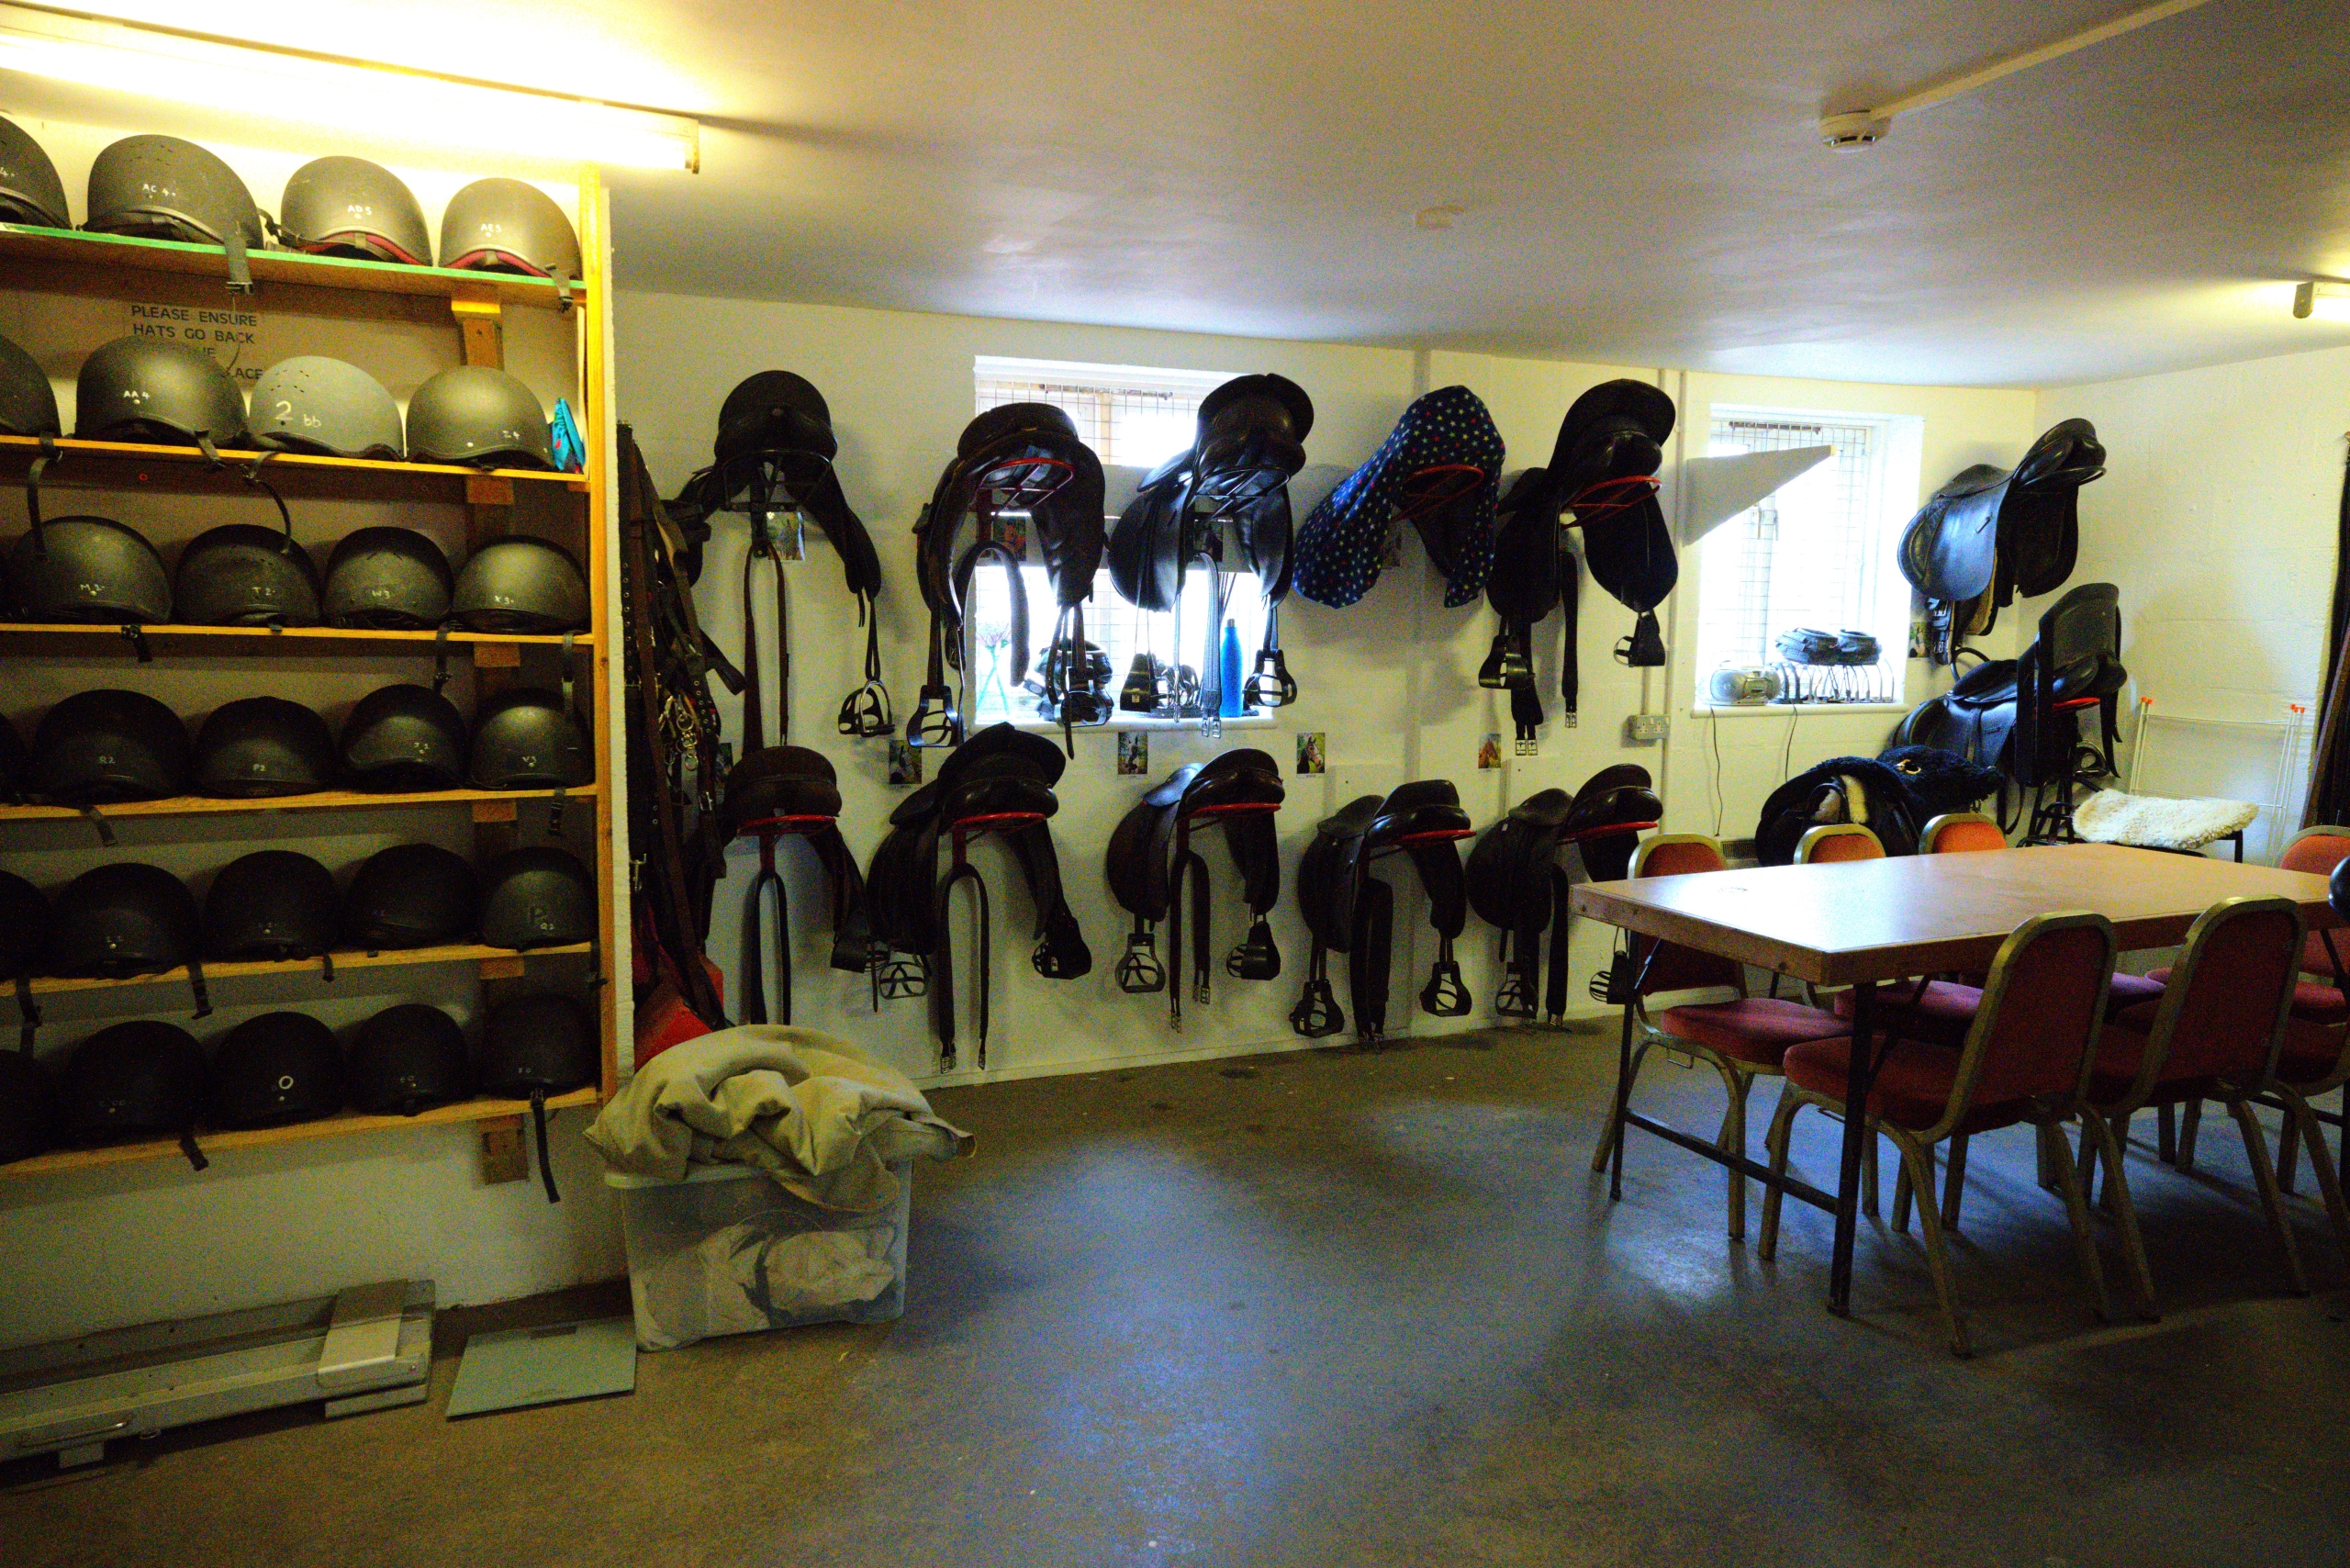 The tack room in the Equestrian Centre. There's a row of saddles on the back wall, a table with chairs around it in front and then to the left, shelves filled with riding hats.